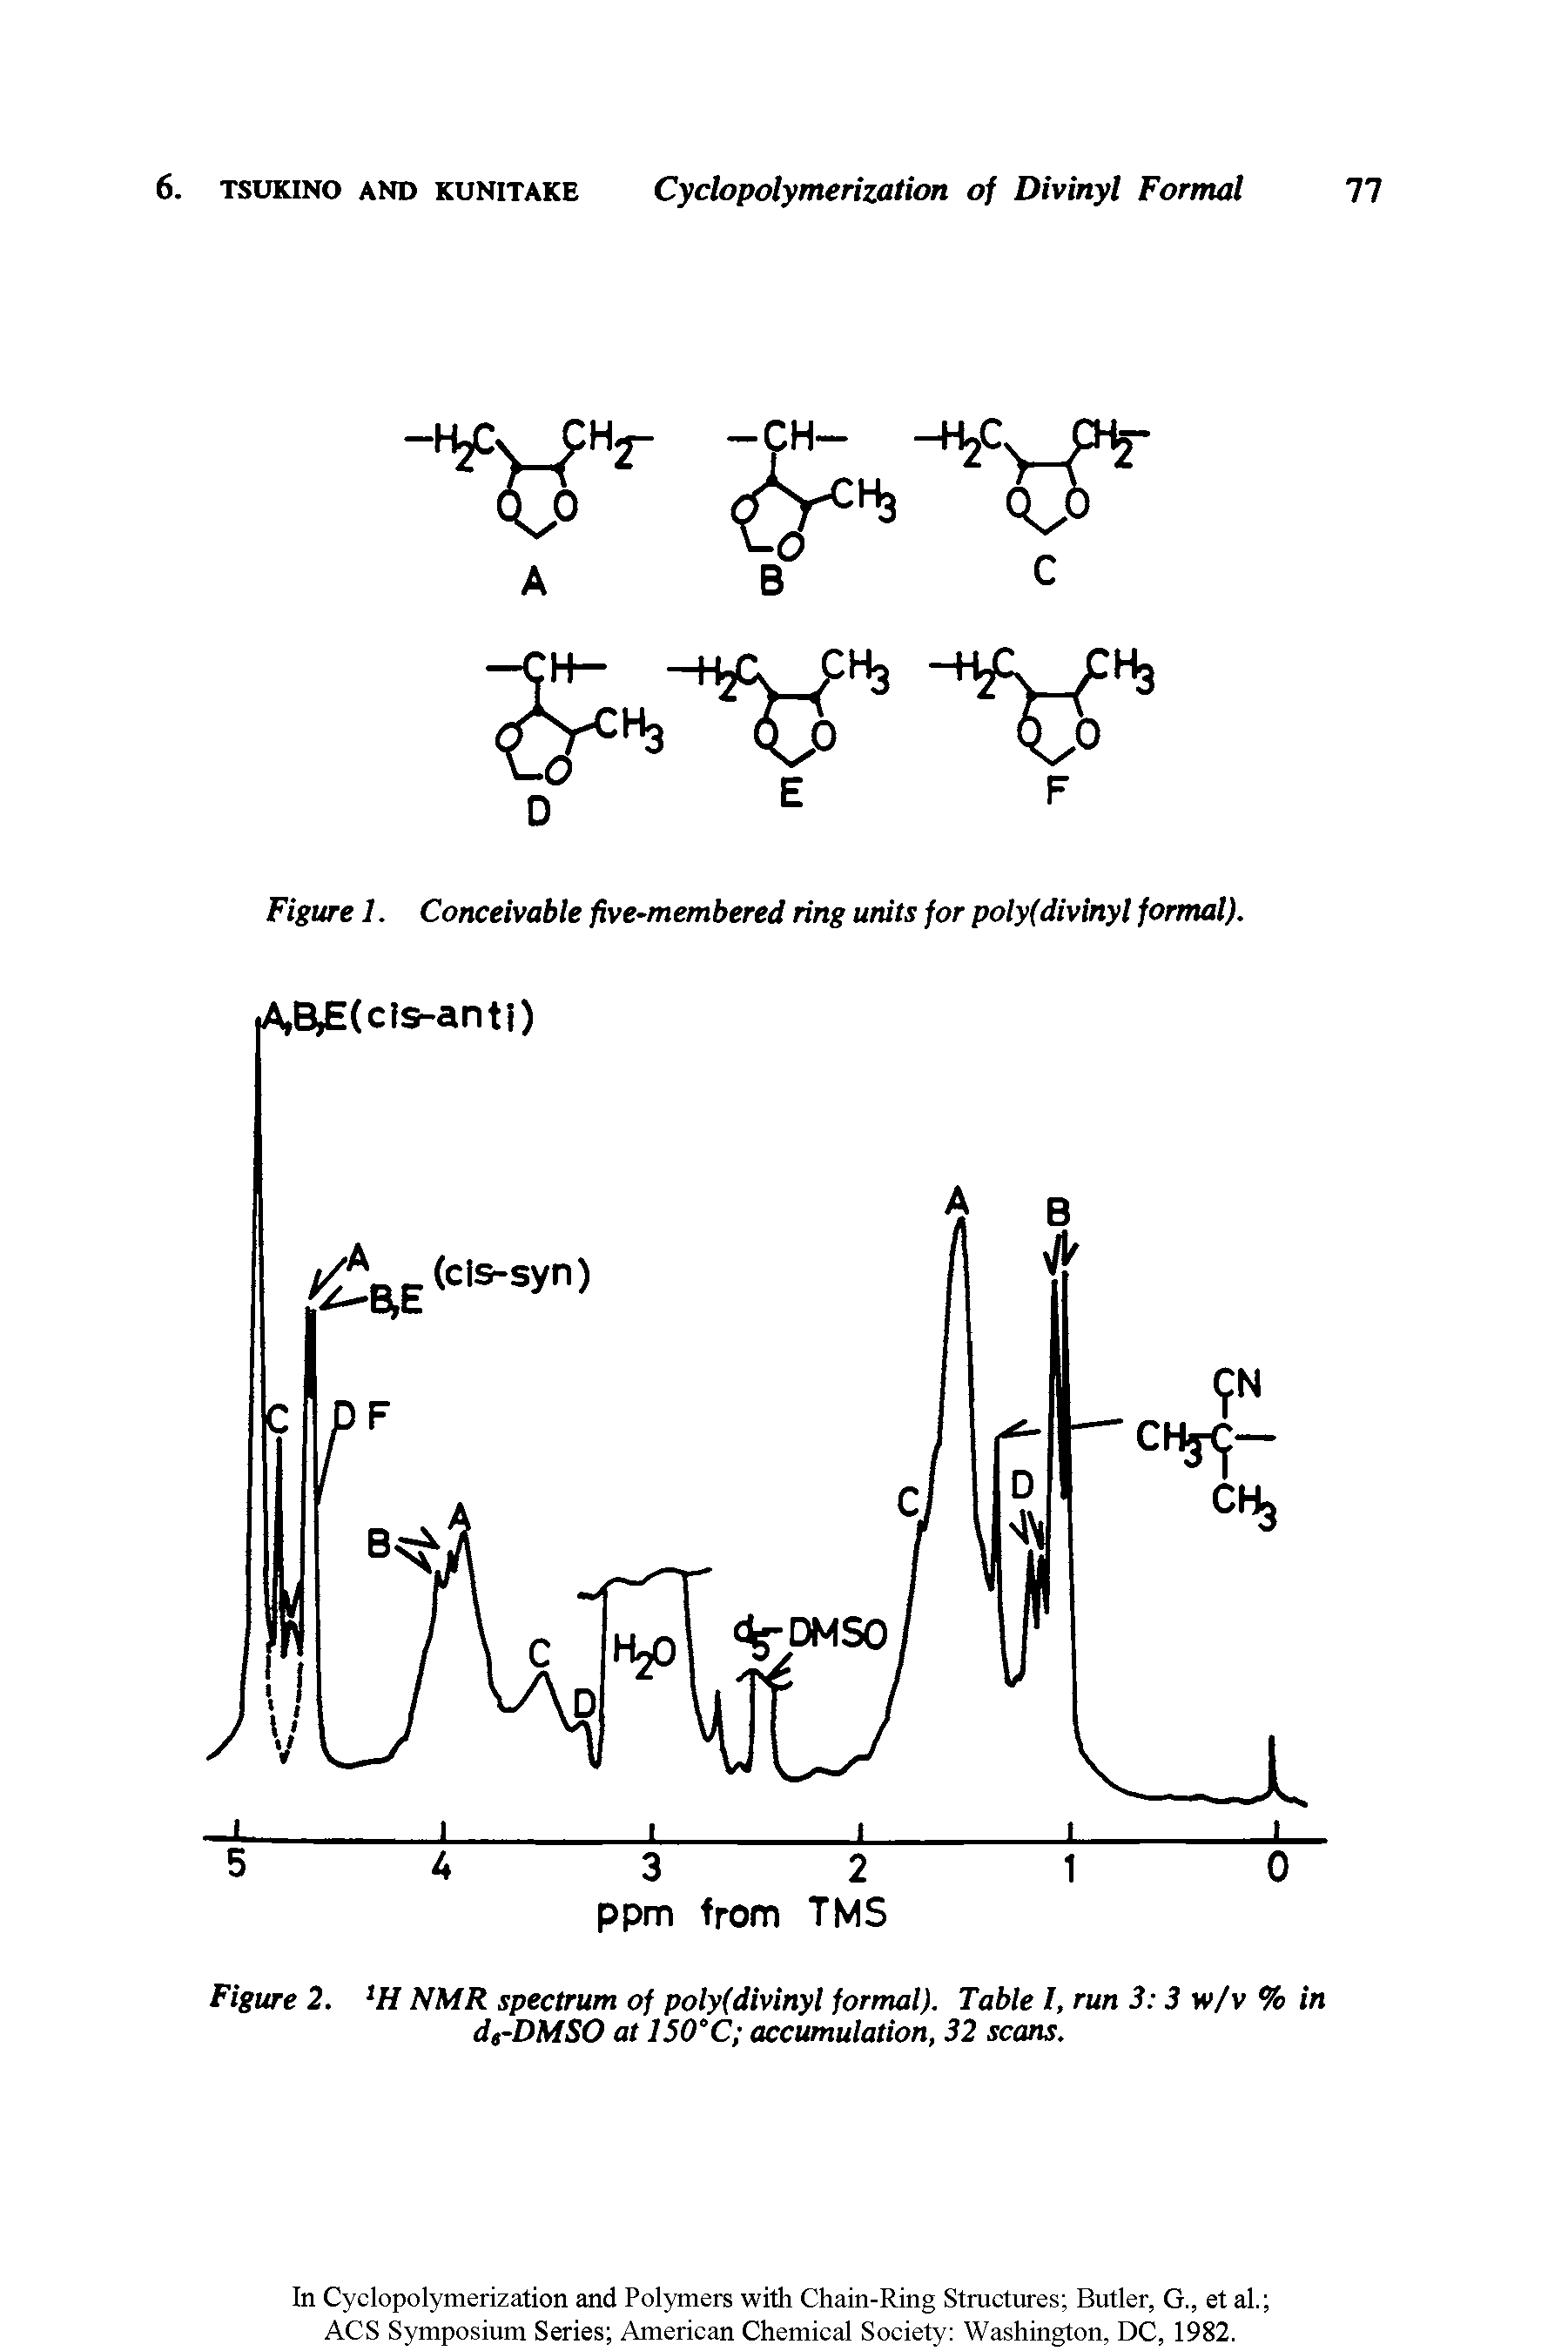 Figure 2. H NMR spectrum of poly (divinyl formal). Table I, run 3 3 w/v % in d,-DMSO at 150°C accumulation, 32 scans.